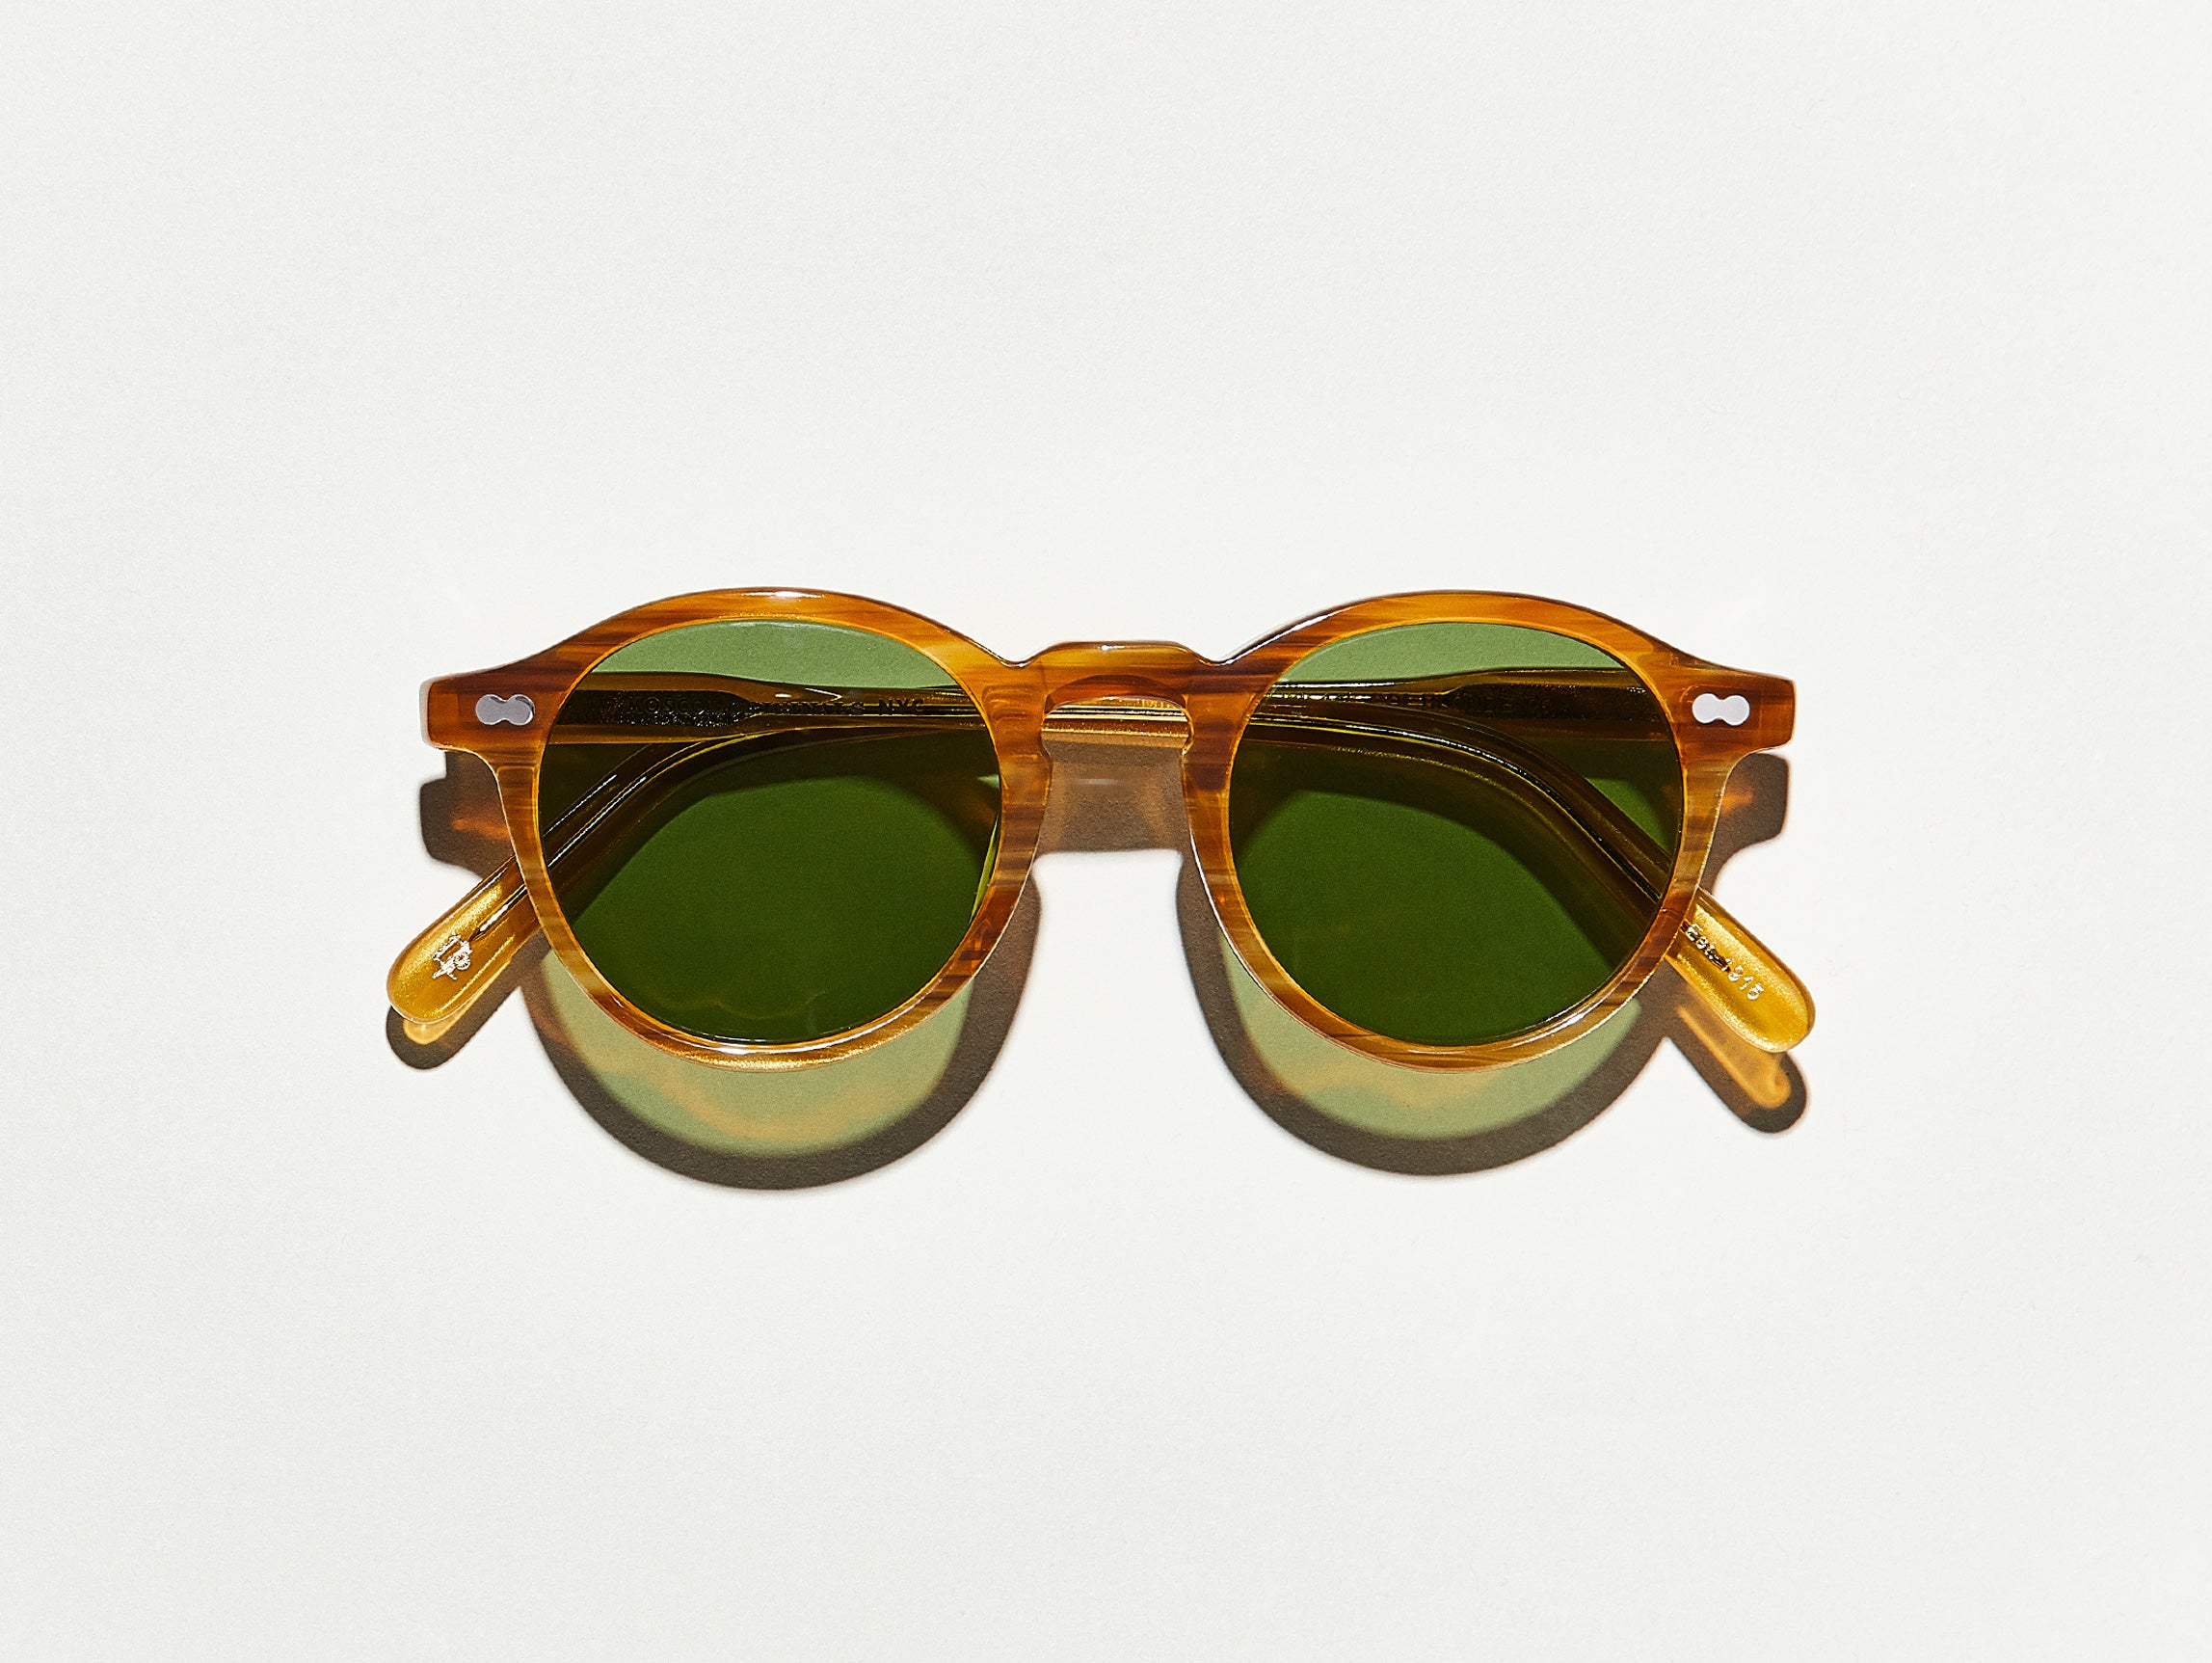 #color_blonde | The MILTZEN in Blonde with Calibar Green Glass Lenses